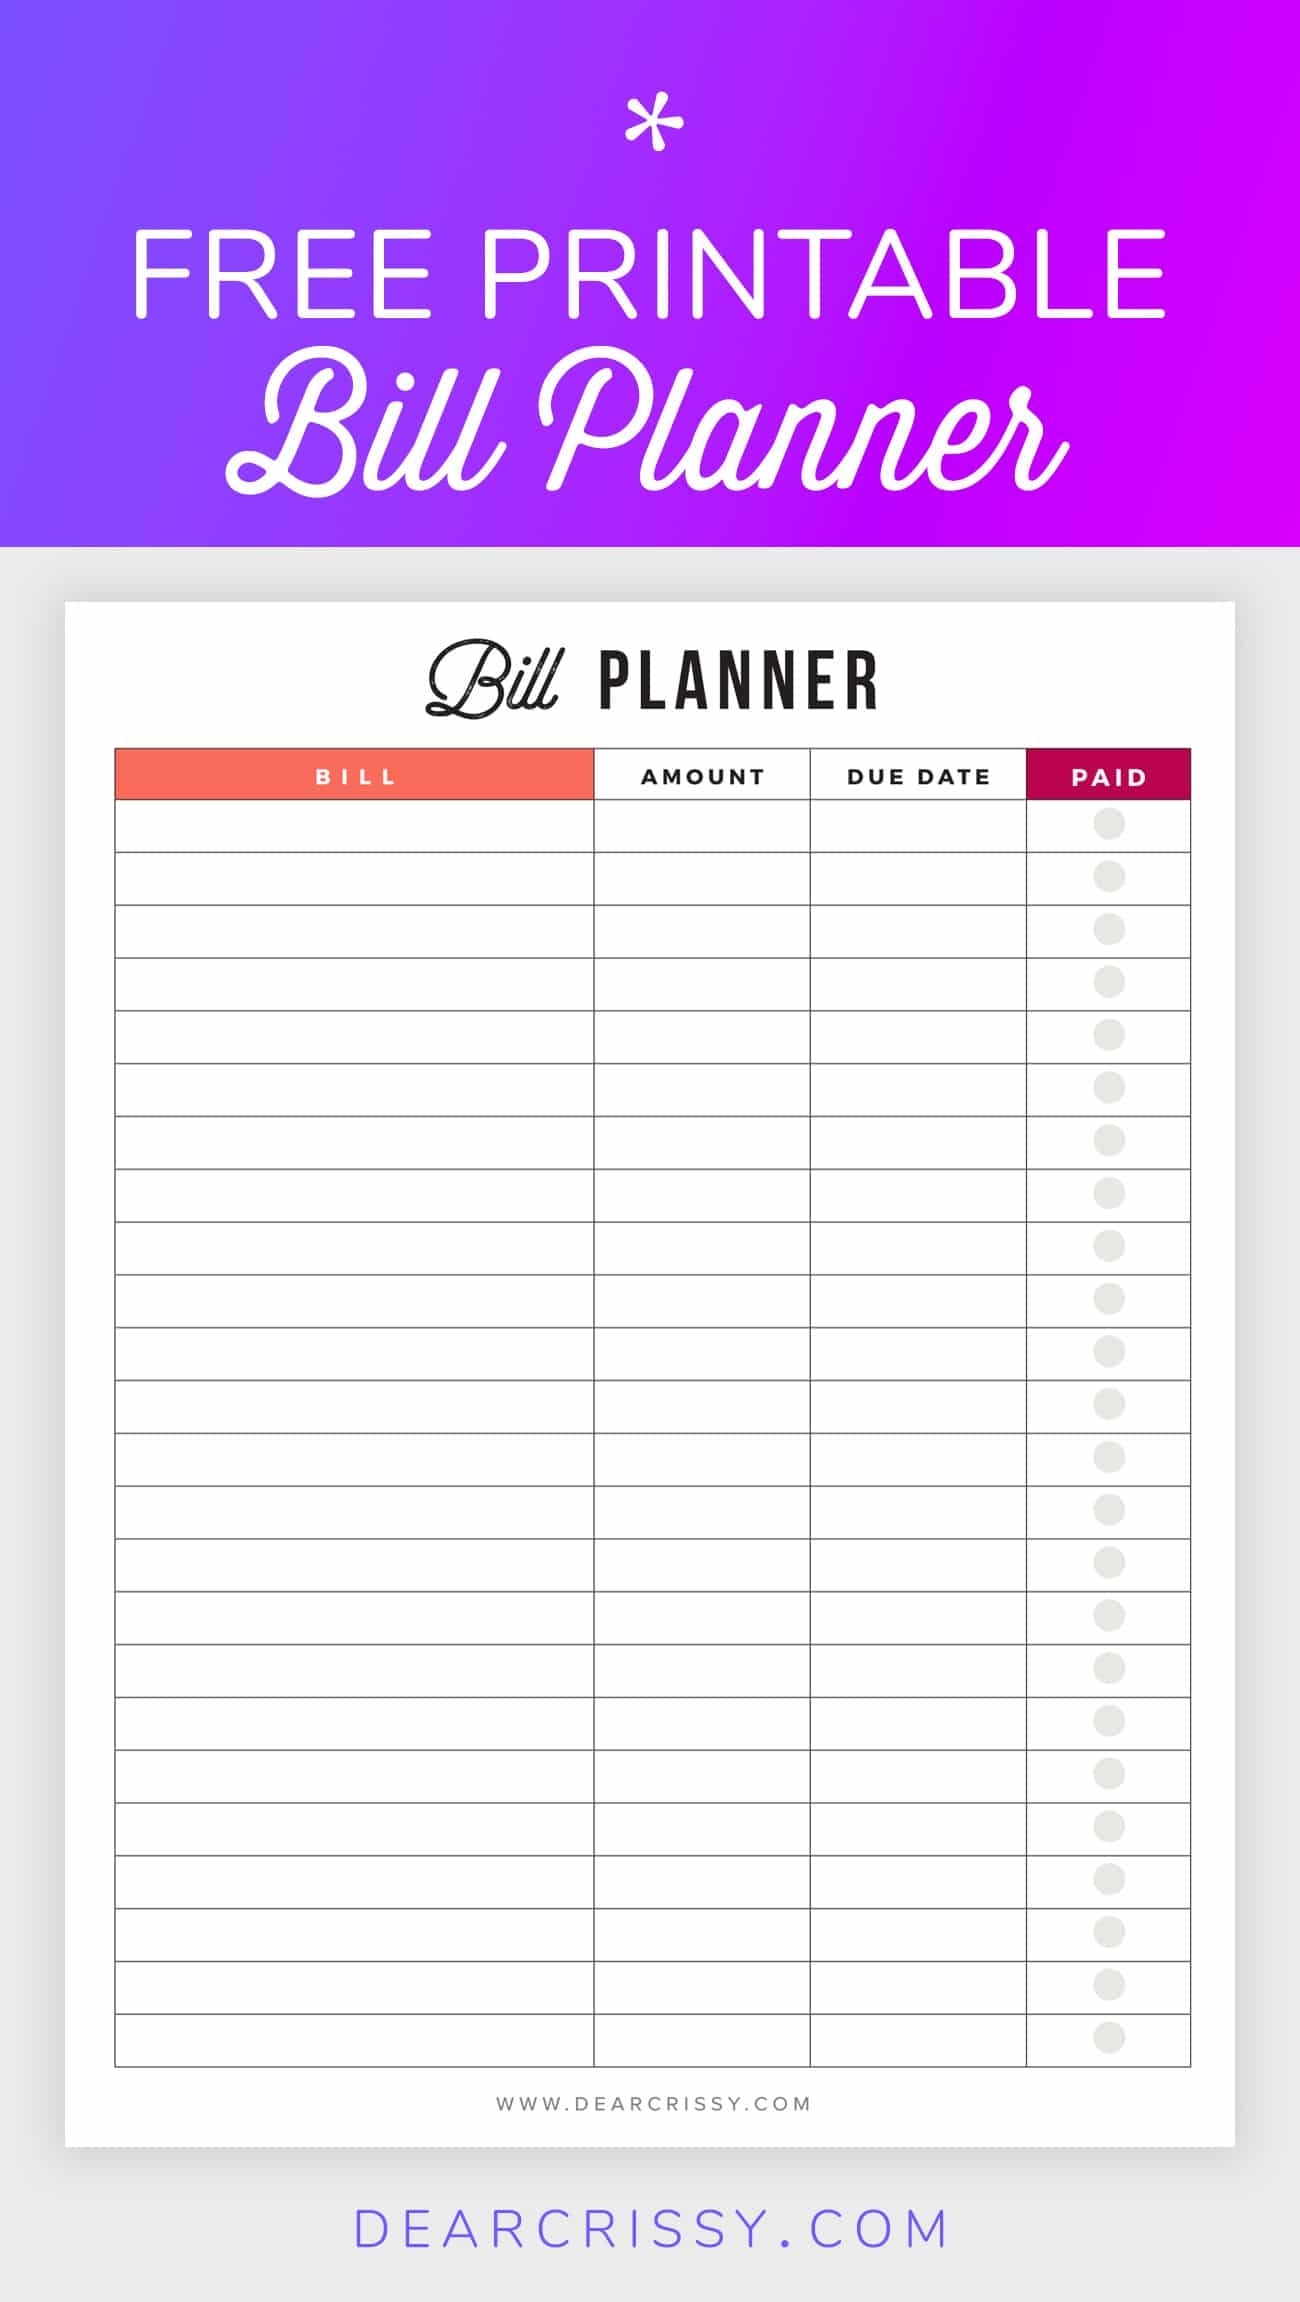 Bill Planner Printable - Pay Down Your Bills This Year! with Free Printable Bill Budget Calendar